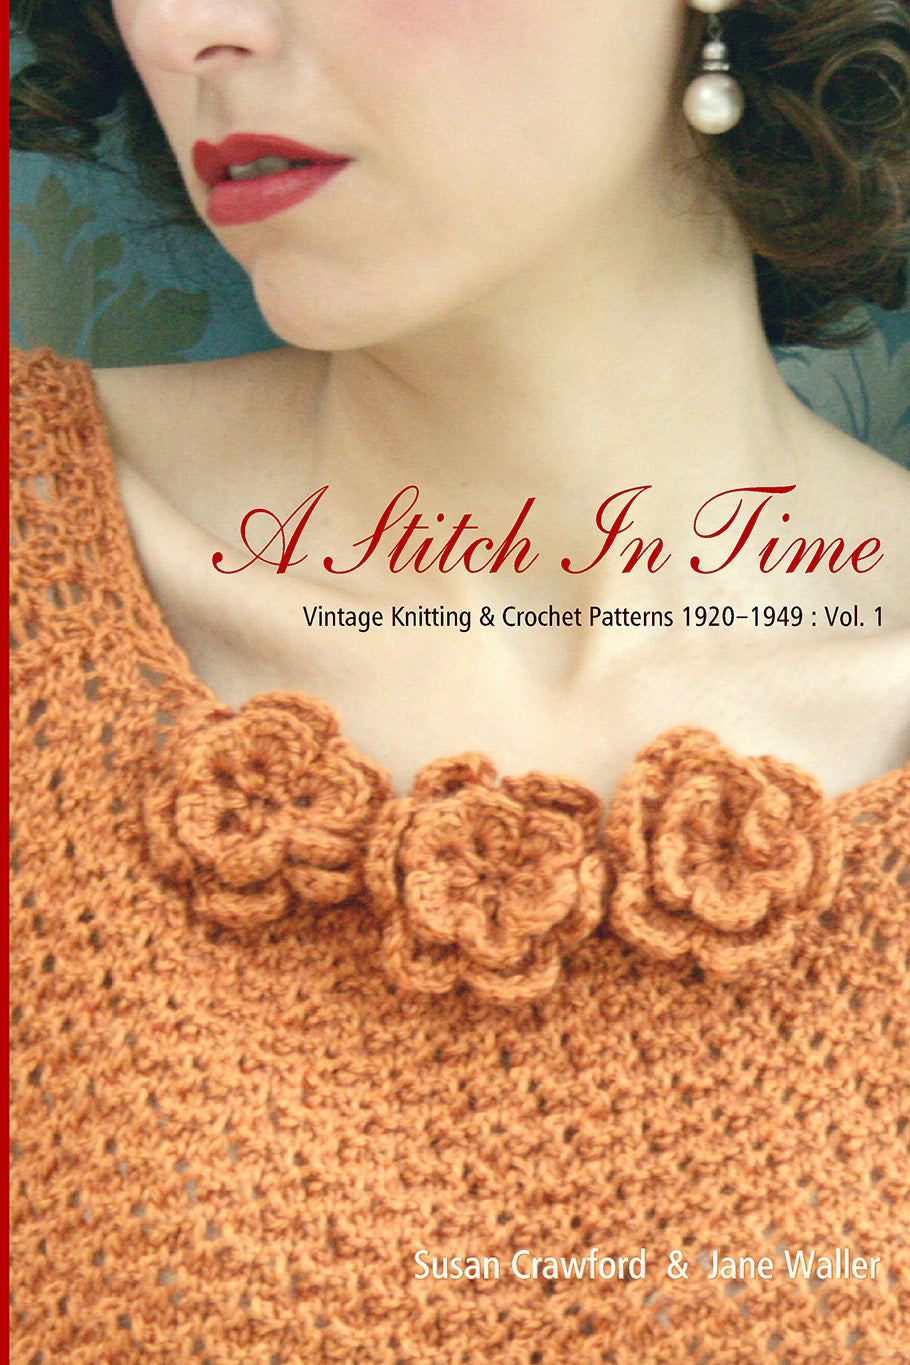 A Stitch in Time Vintage Knitting & Crochet Patterns, 1920-1949: Vol. 1 E-Book